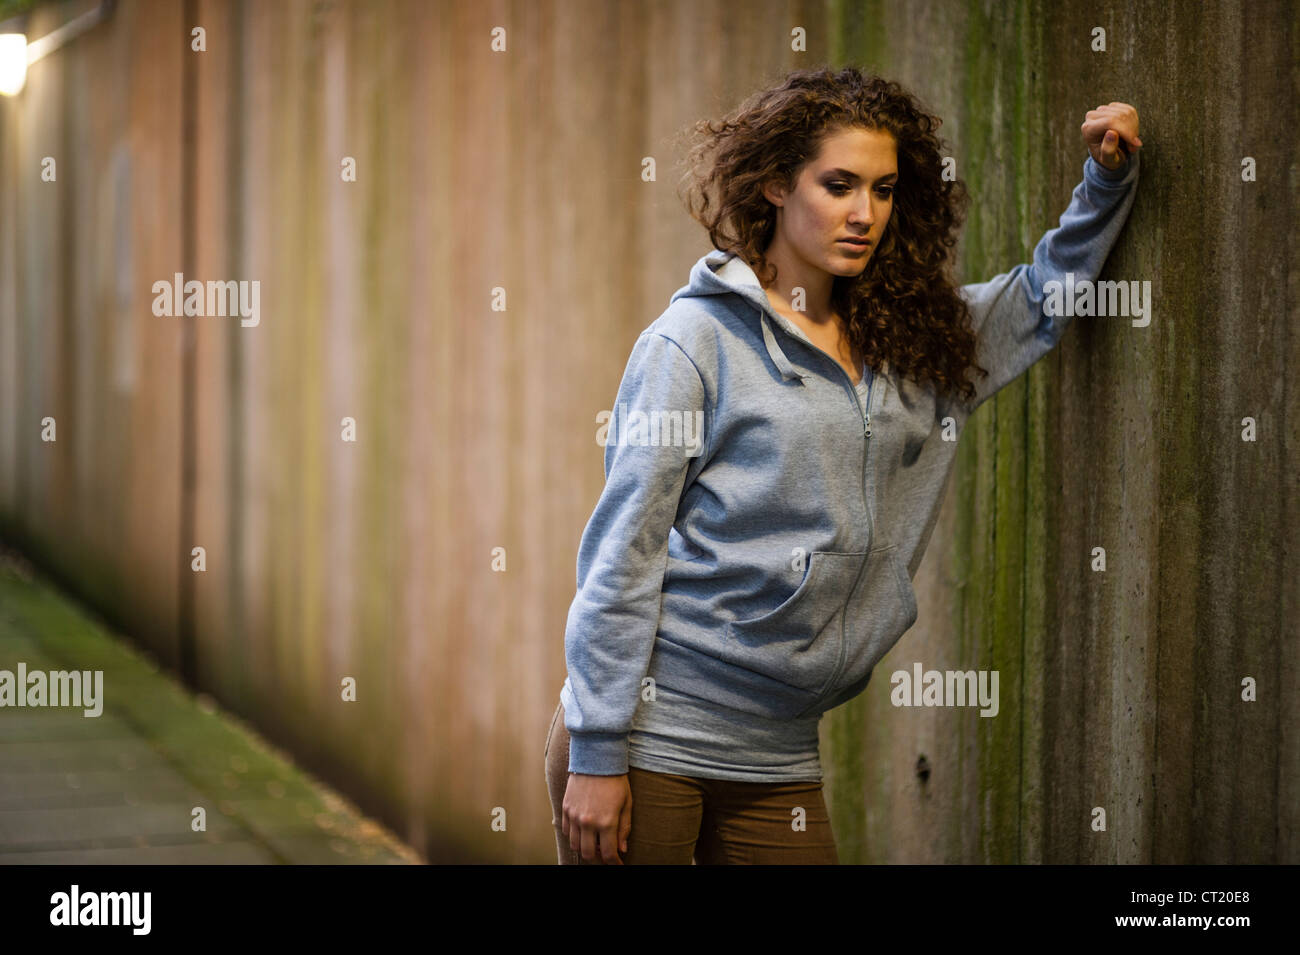 A young 20 year old slim attractive woman girl alone urban city UK Stock Photo